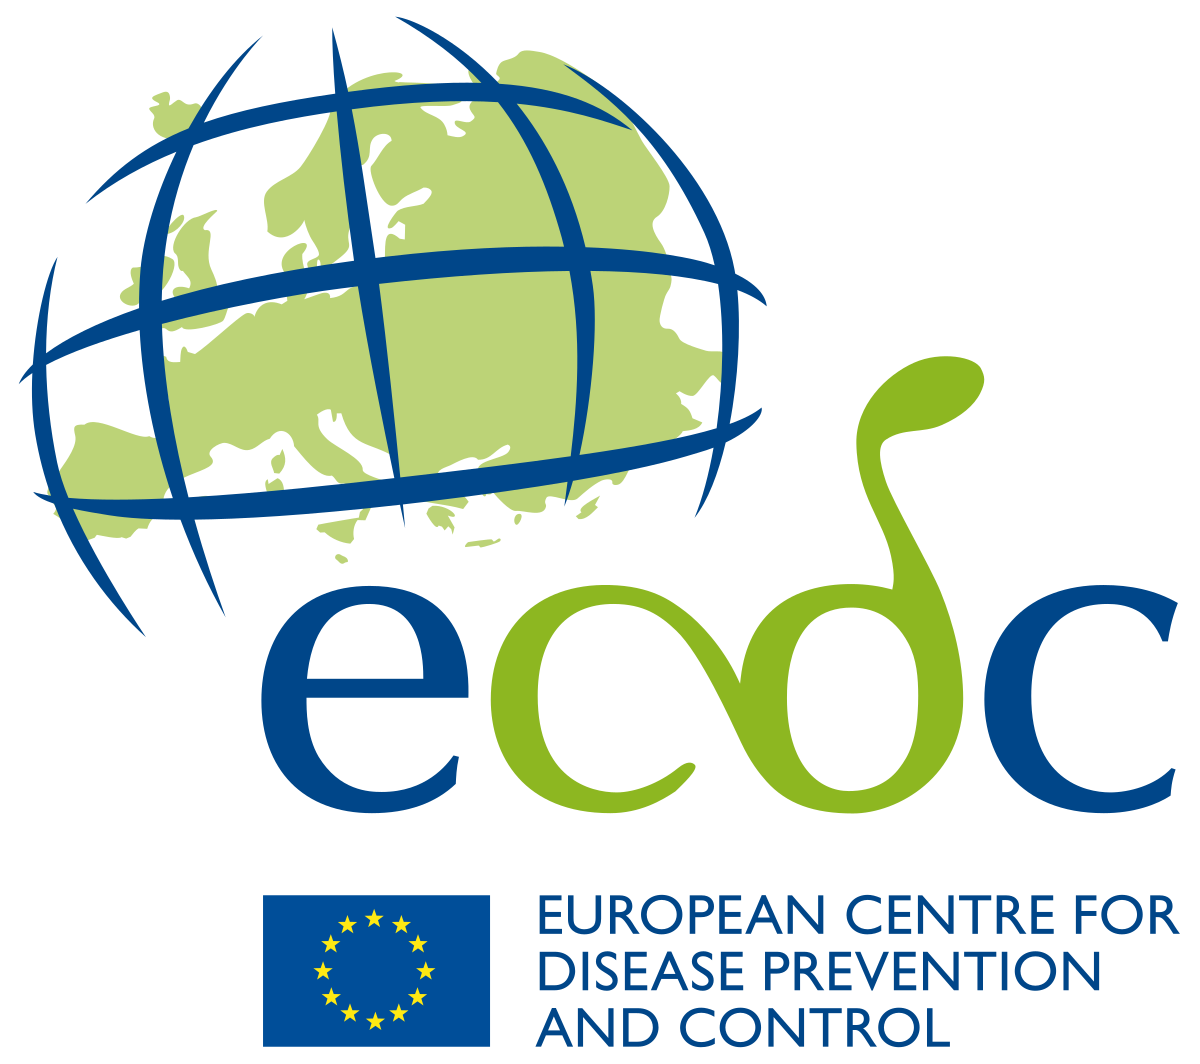 European Centre for Disease Prevention and Control - Wikipedia